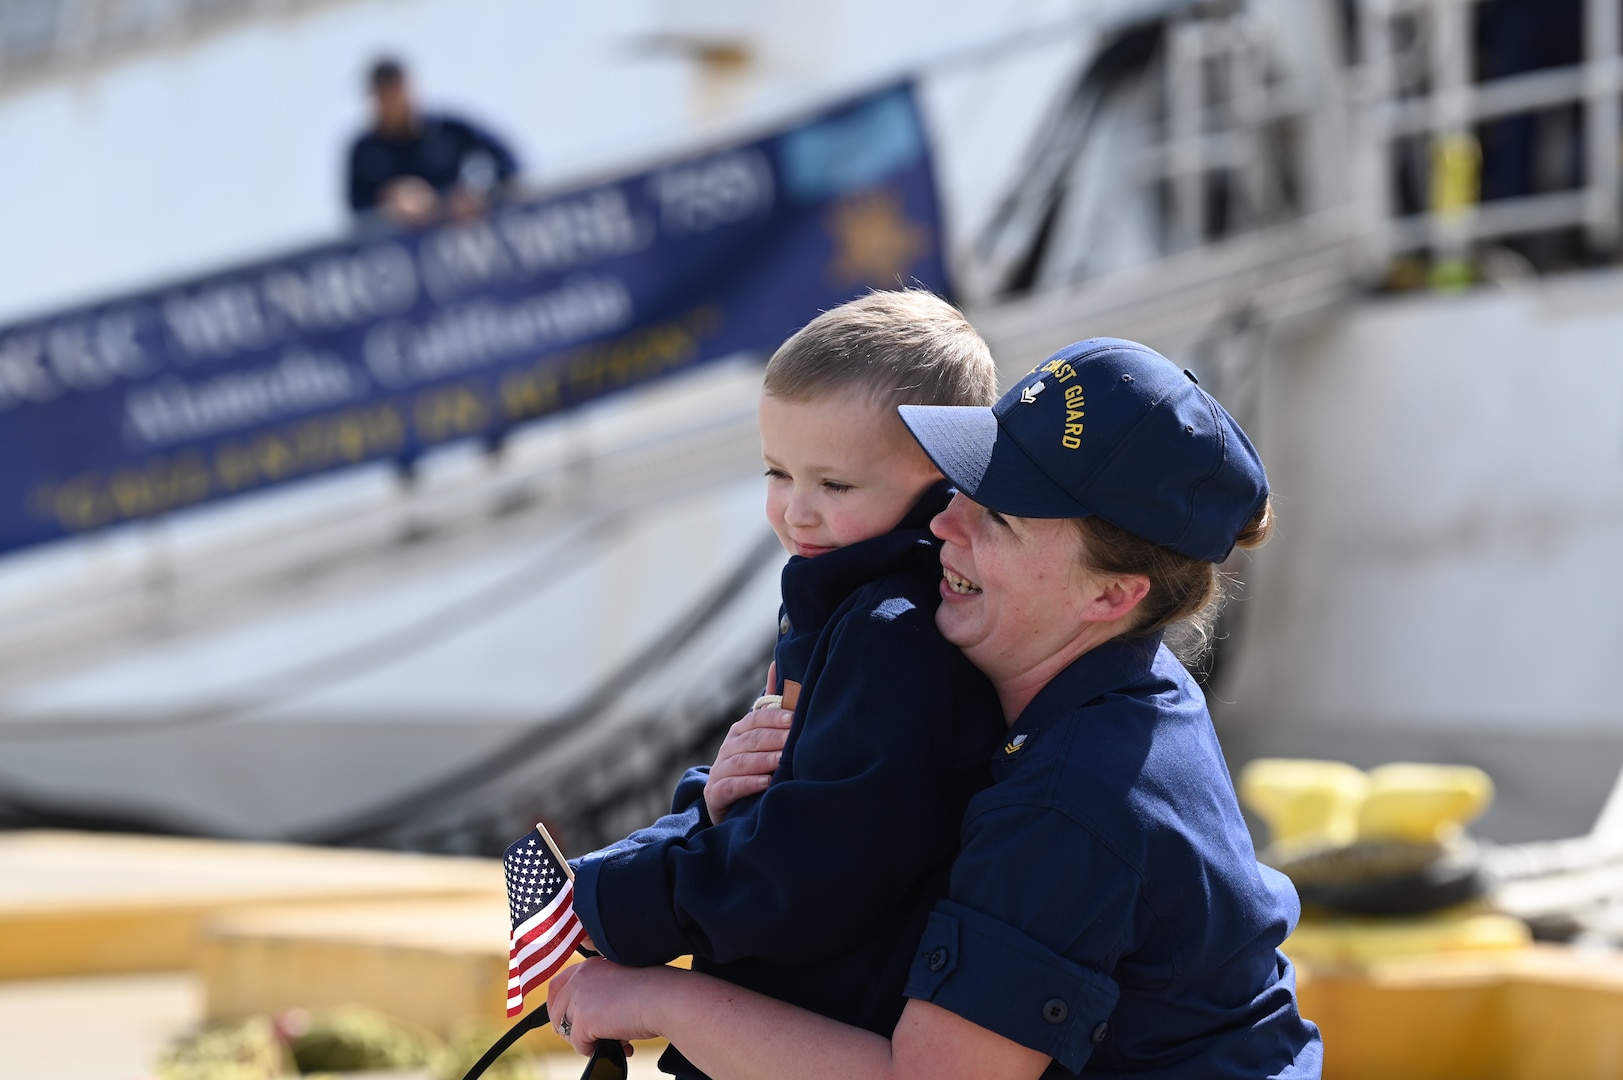 Petty Officer 2nd Class Hannah Capps hugs her son after the Coast Guard Cutter Munro (WMSL 755) returned to Alameda, Calif., March 6, 2023, following a 105-day, 11,500-nautical mile Alaska Patrol. Munro partnered with NOAA Office of Law Enforcement personnel to conduct 24 boardings of commercial fishing vessels with the goal of enforcing sustainable fishing practices and ensuring compliance with federal regulations. U.S. Coast Guard Cutter Munro returns from Alaska Patrol. U.S. Coast Guard photo by Chief Petty Officer Matthew S. Masaschi.